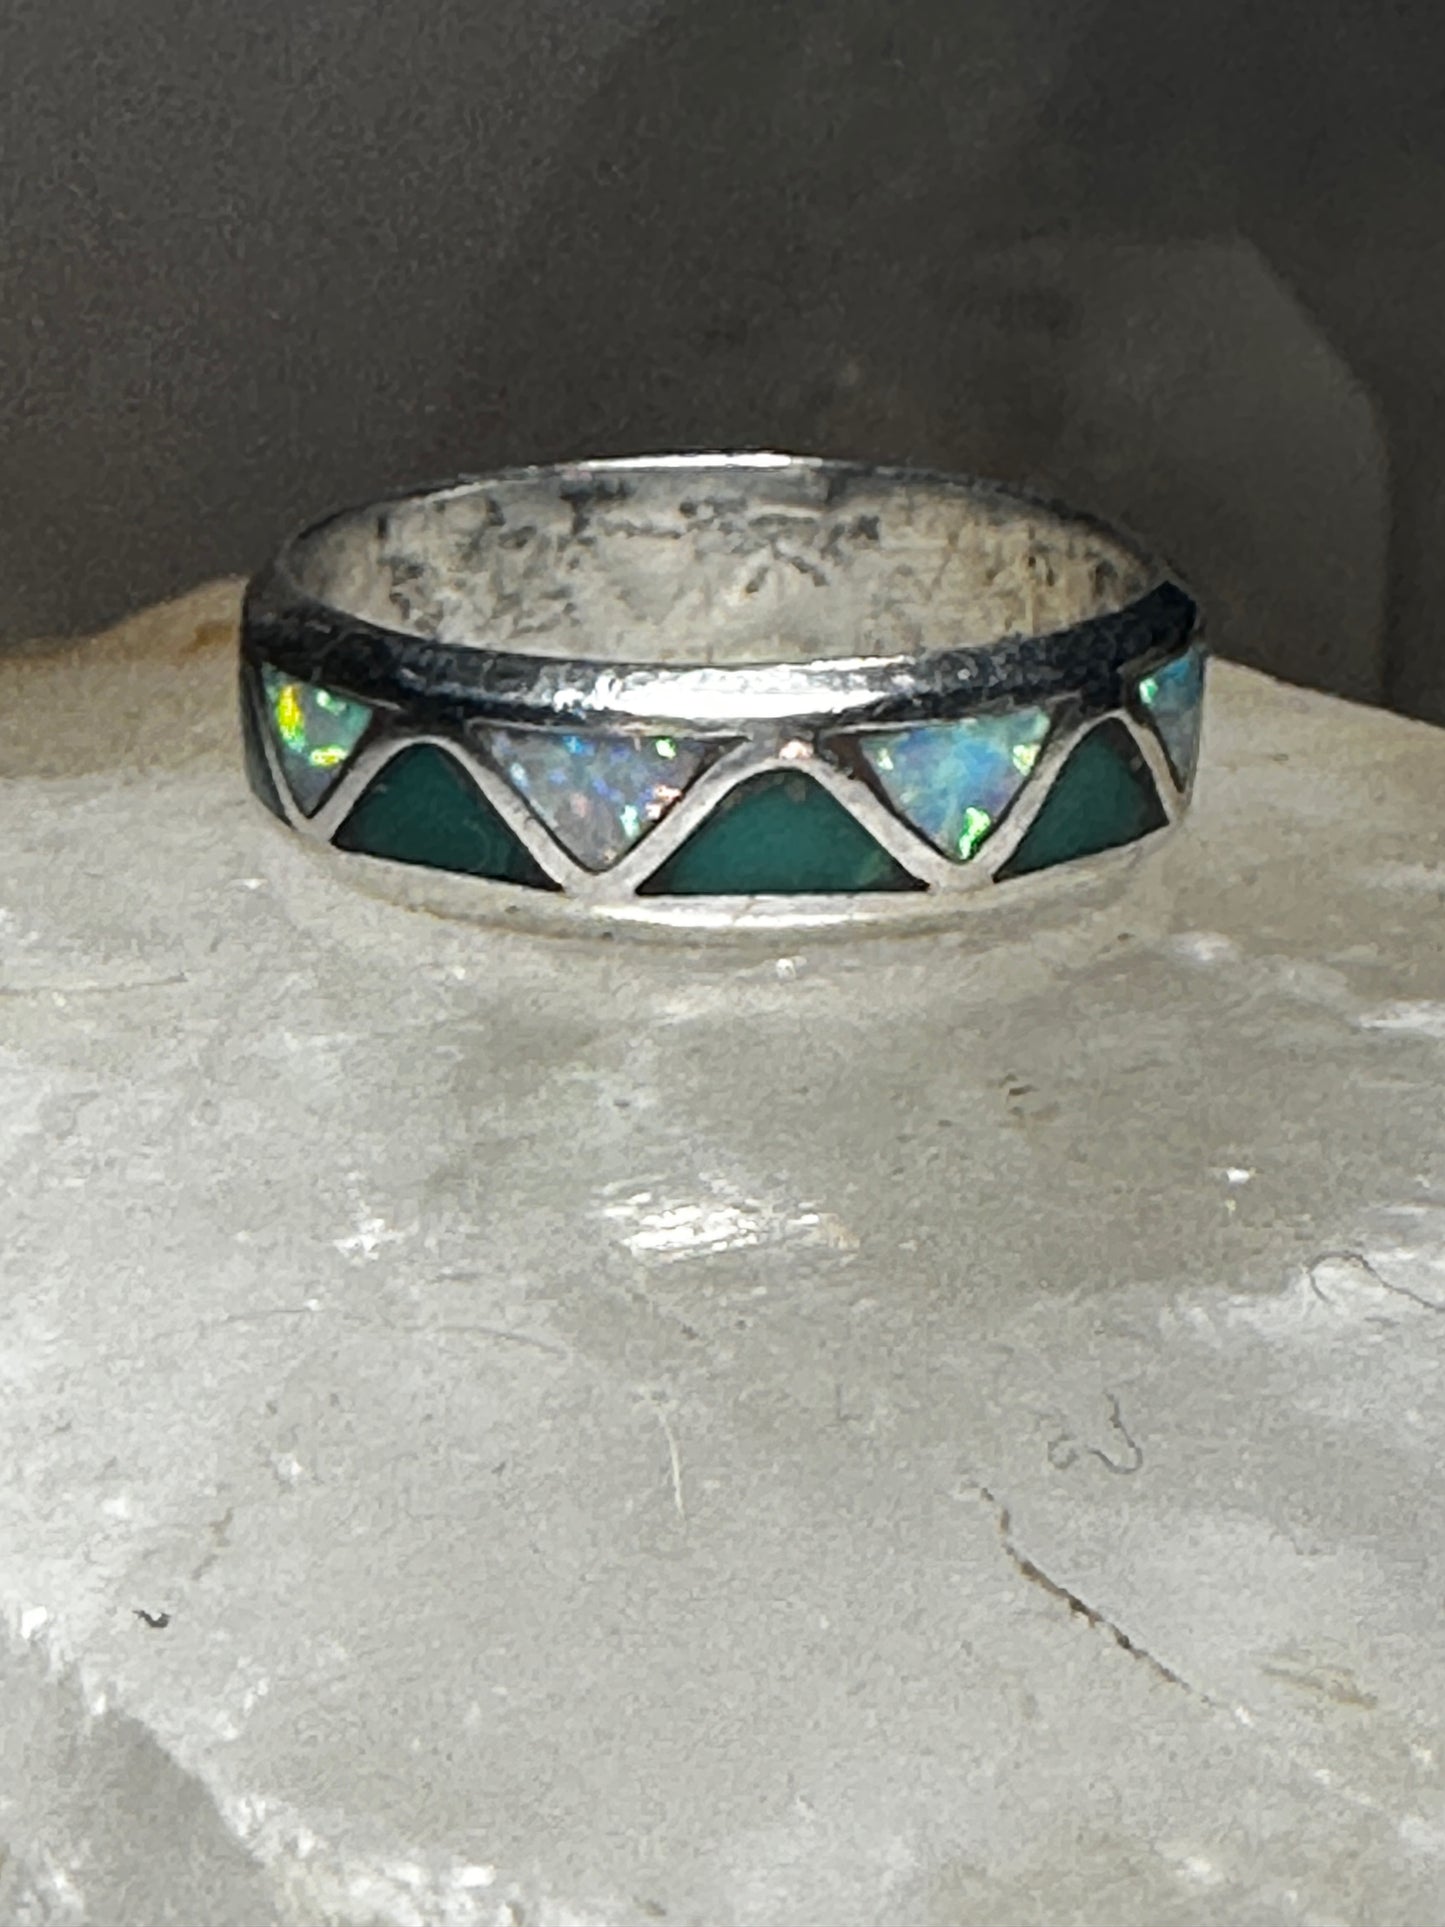 Turquoise lab opal ring size 9 southwest band wedding sterling silver women men